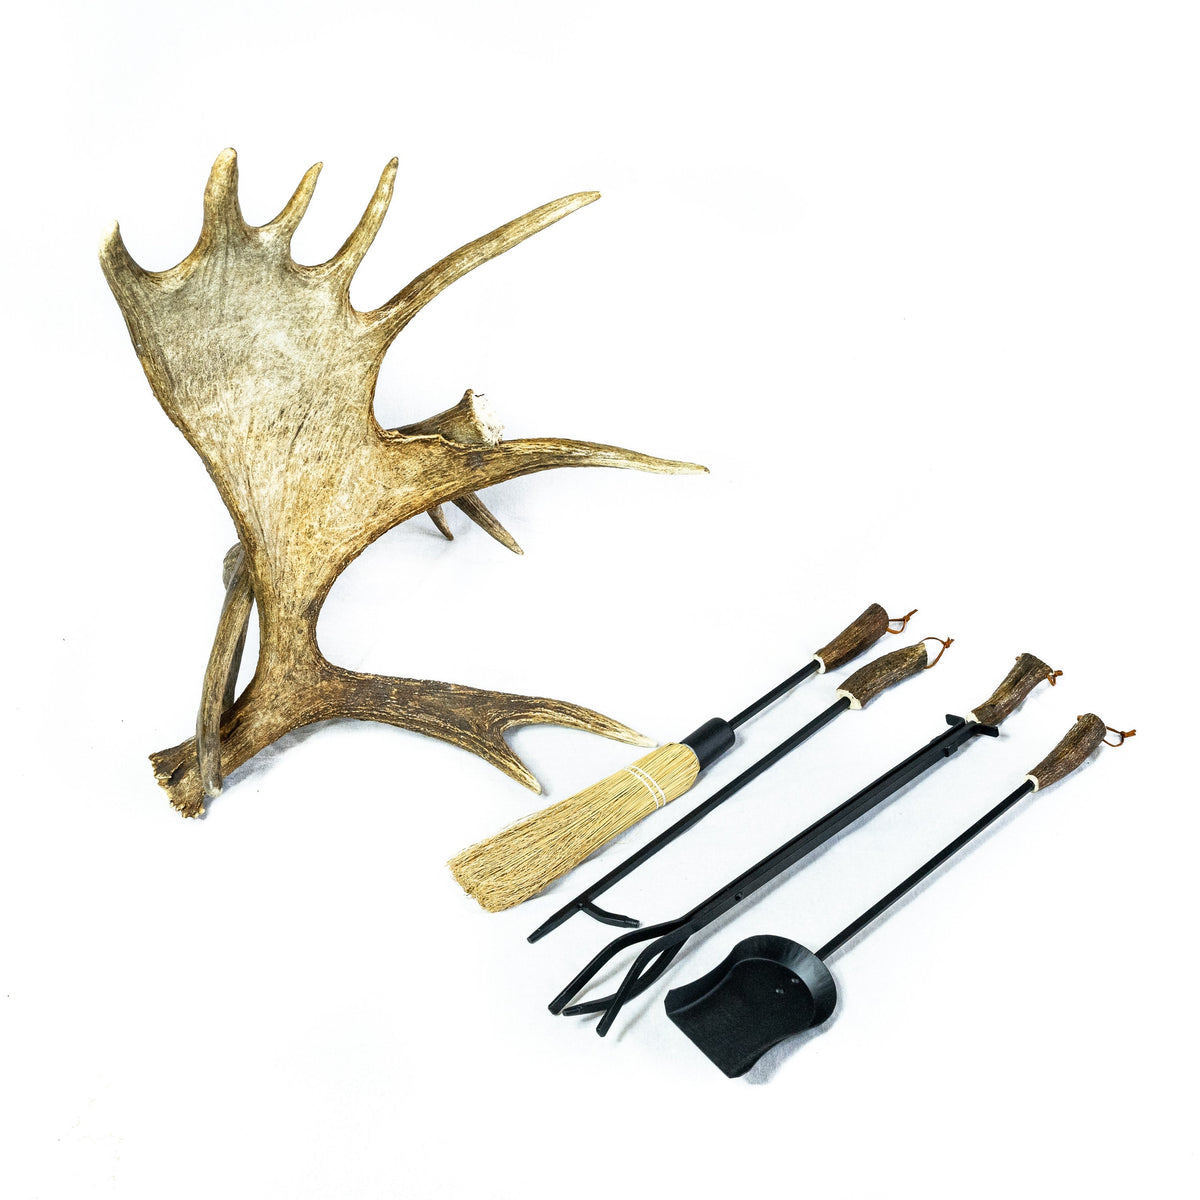 Moose Antler Fireplace Set - Includes Four Fireplace Tools: Poker, Brush, Shovel, Tongs and Stand - W/ Real Antler Handles